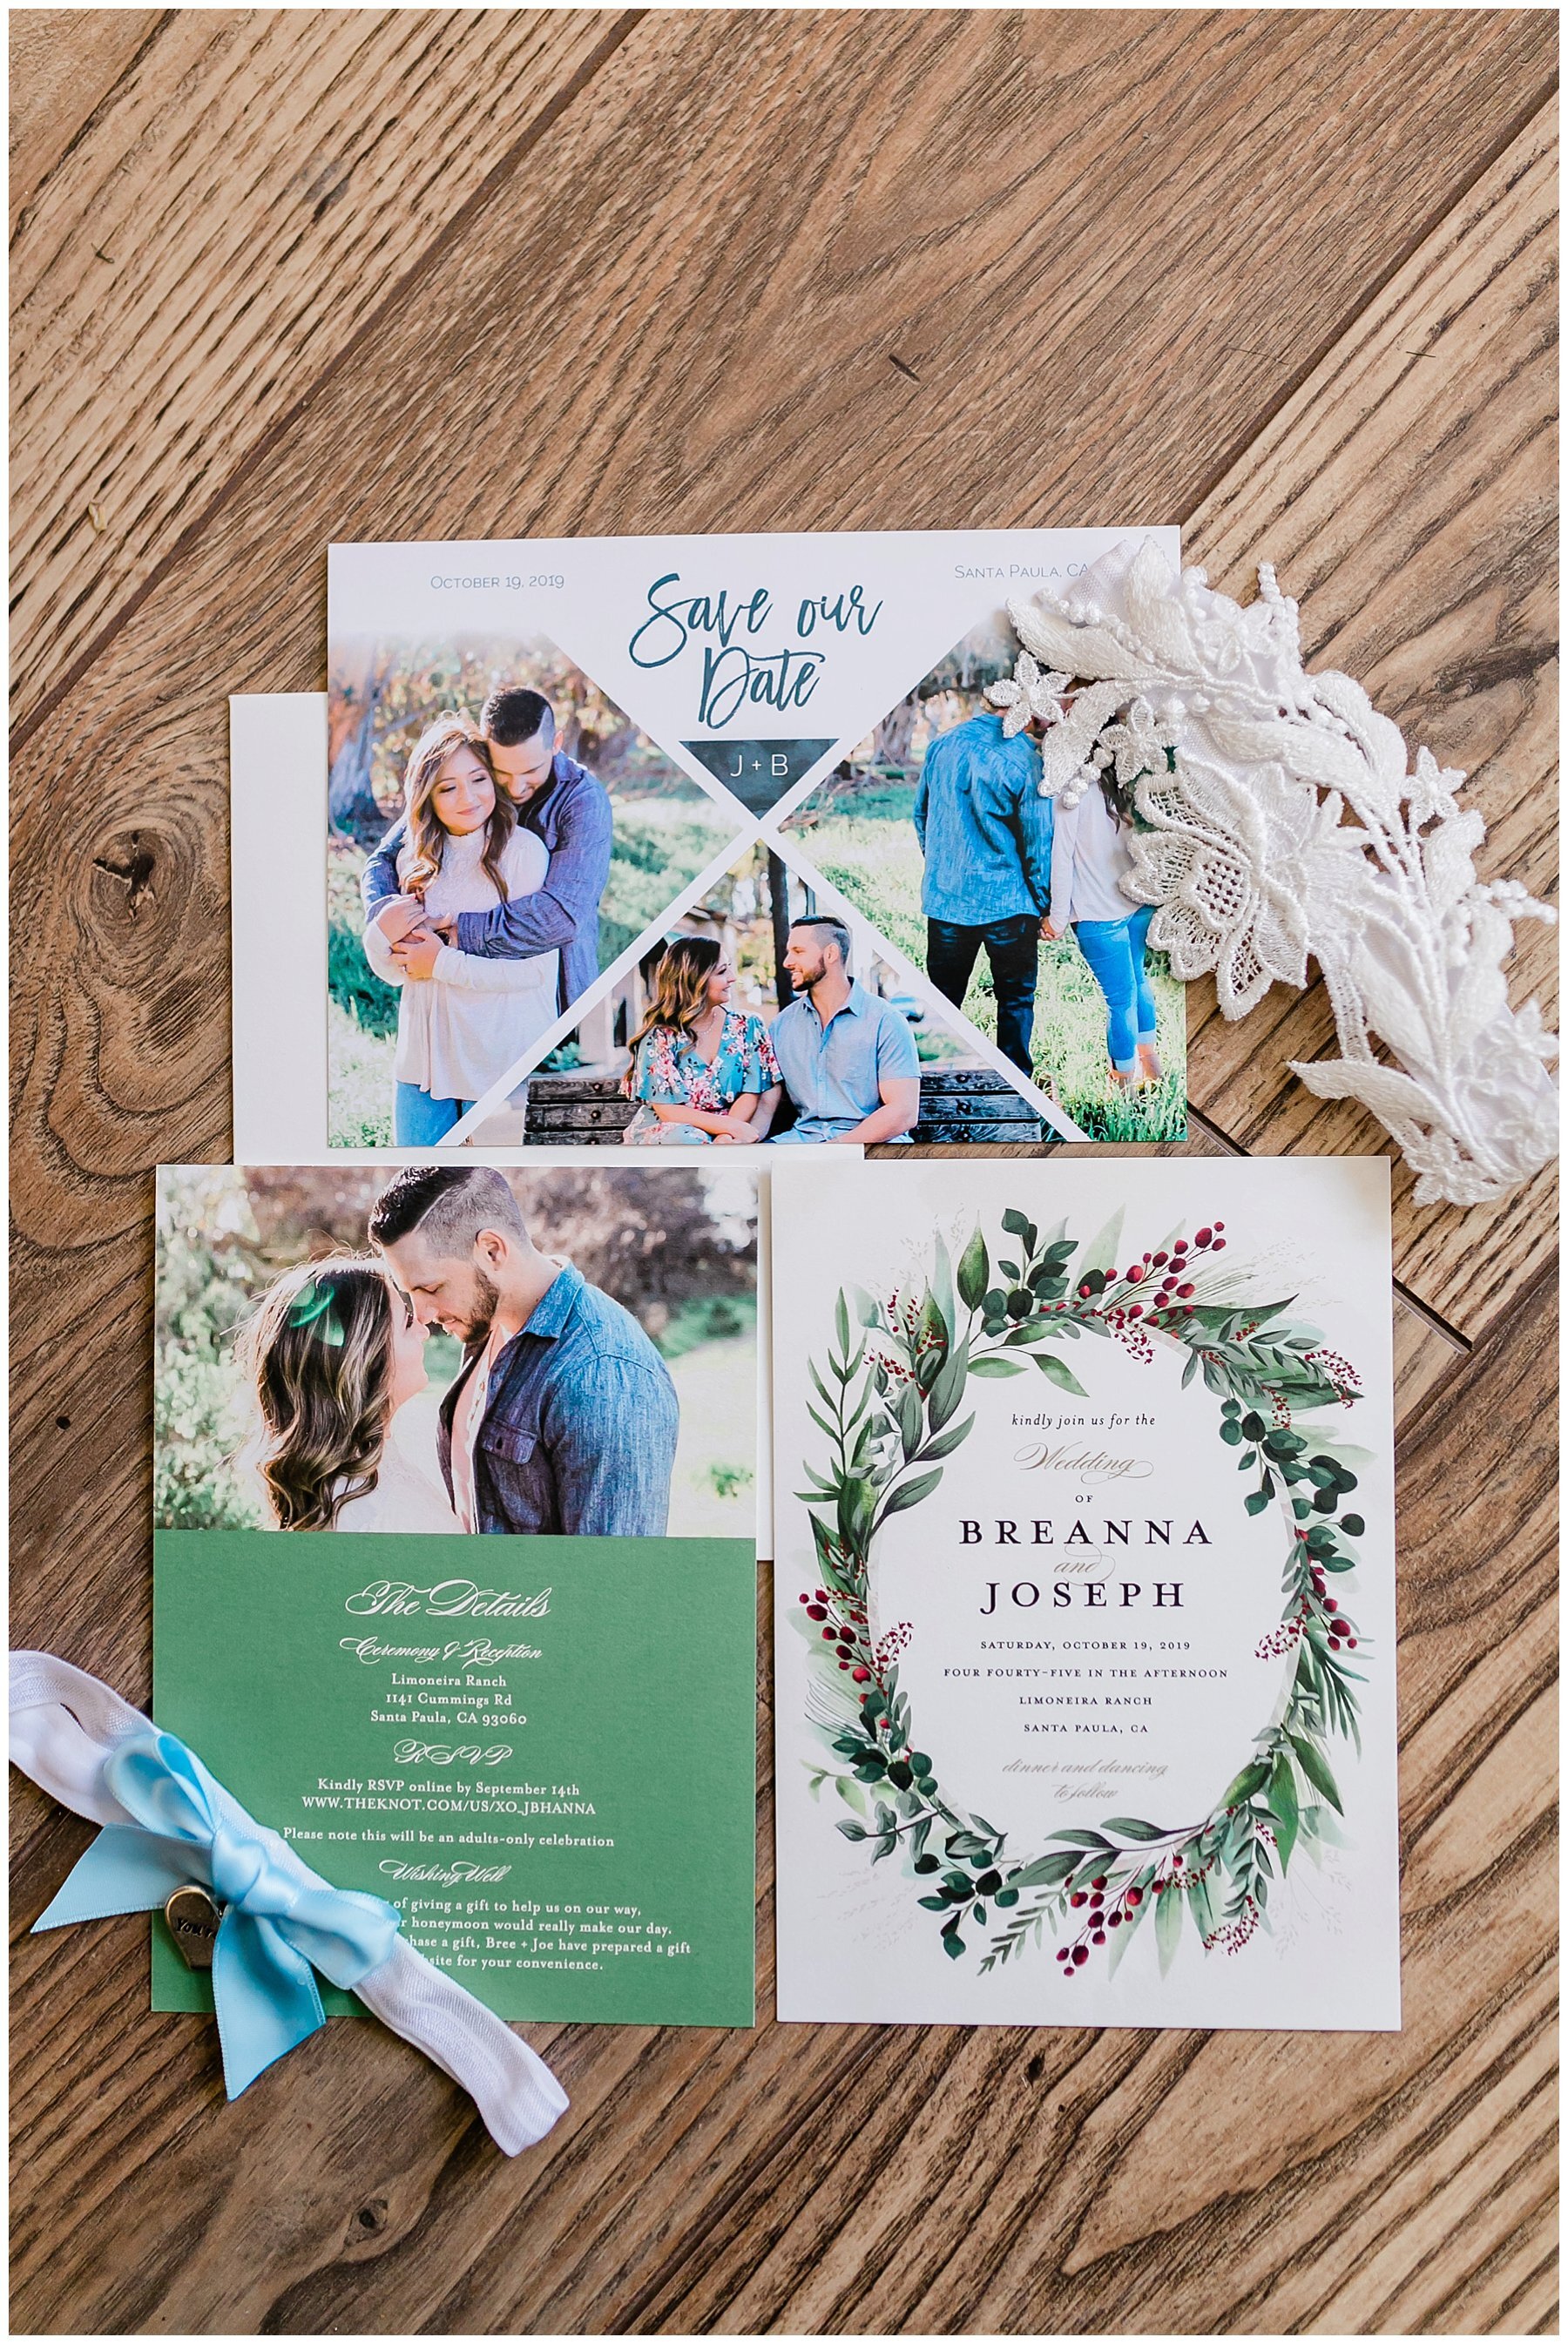  wedding invitations and save the date 